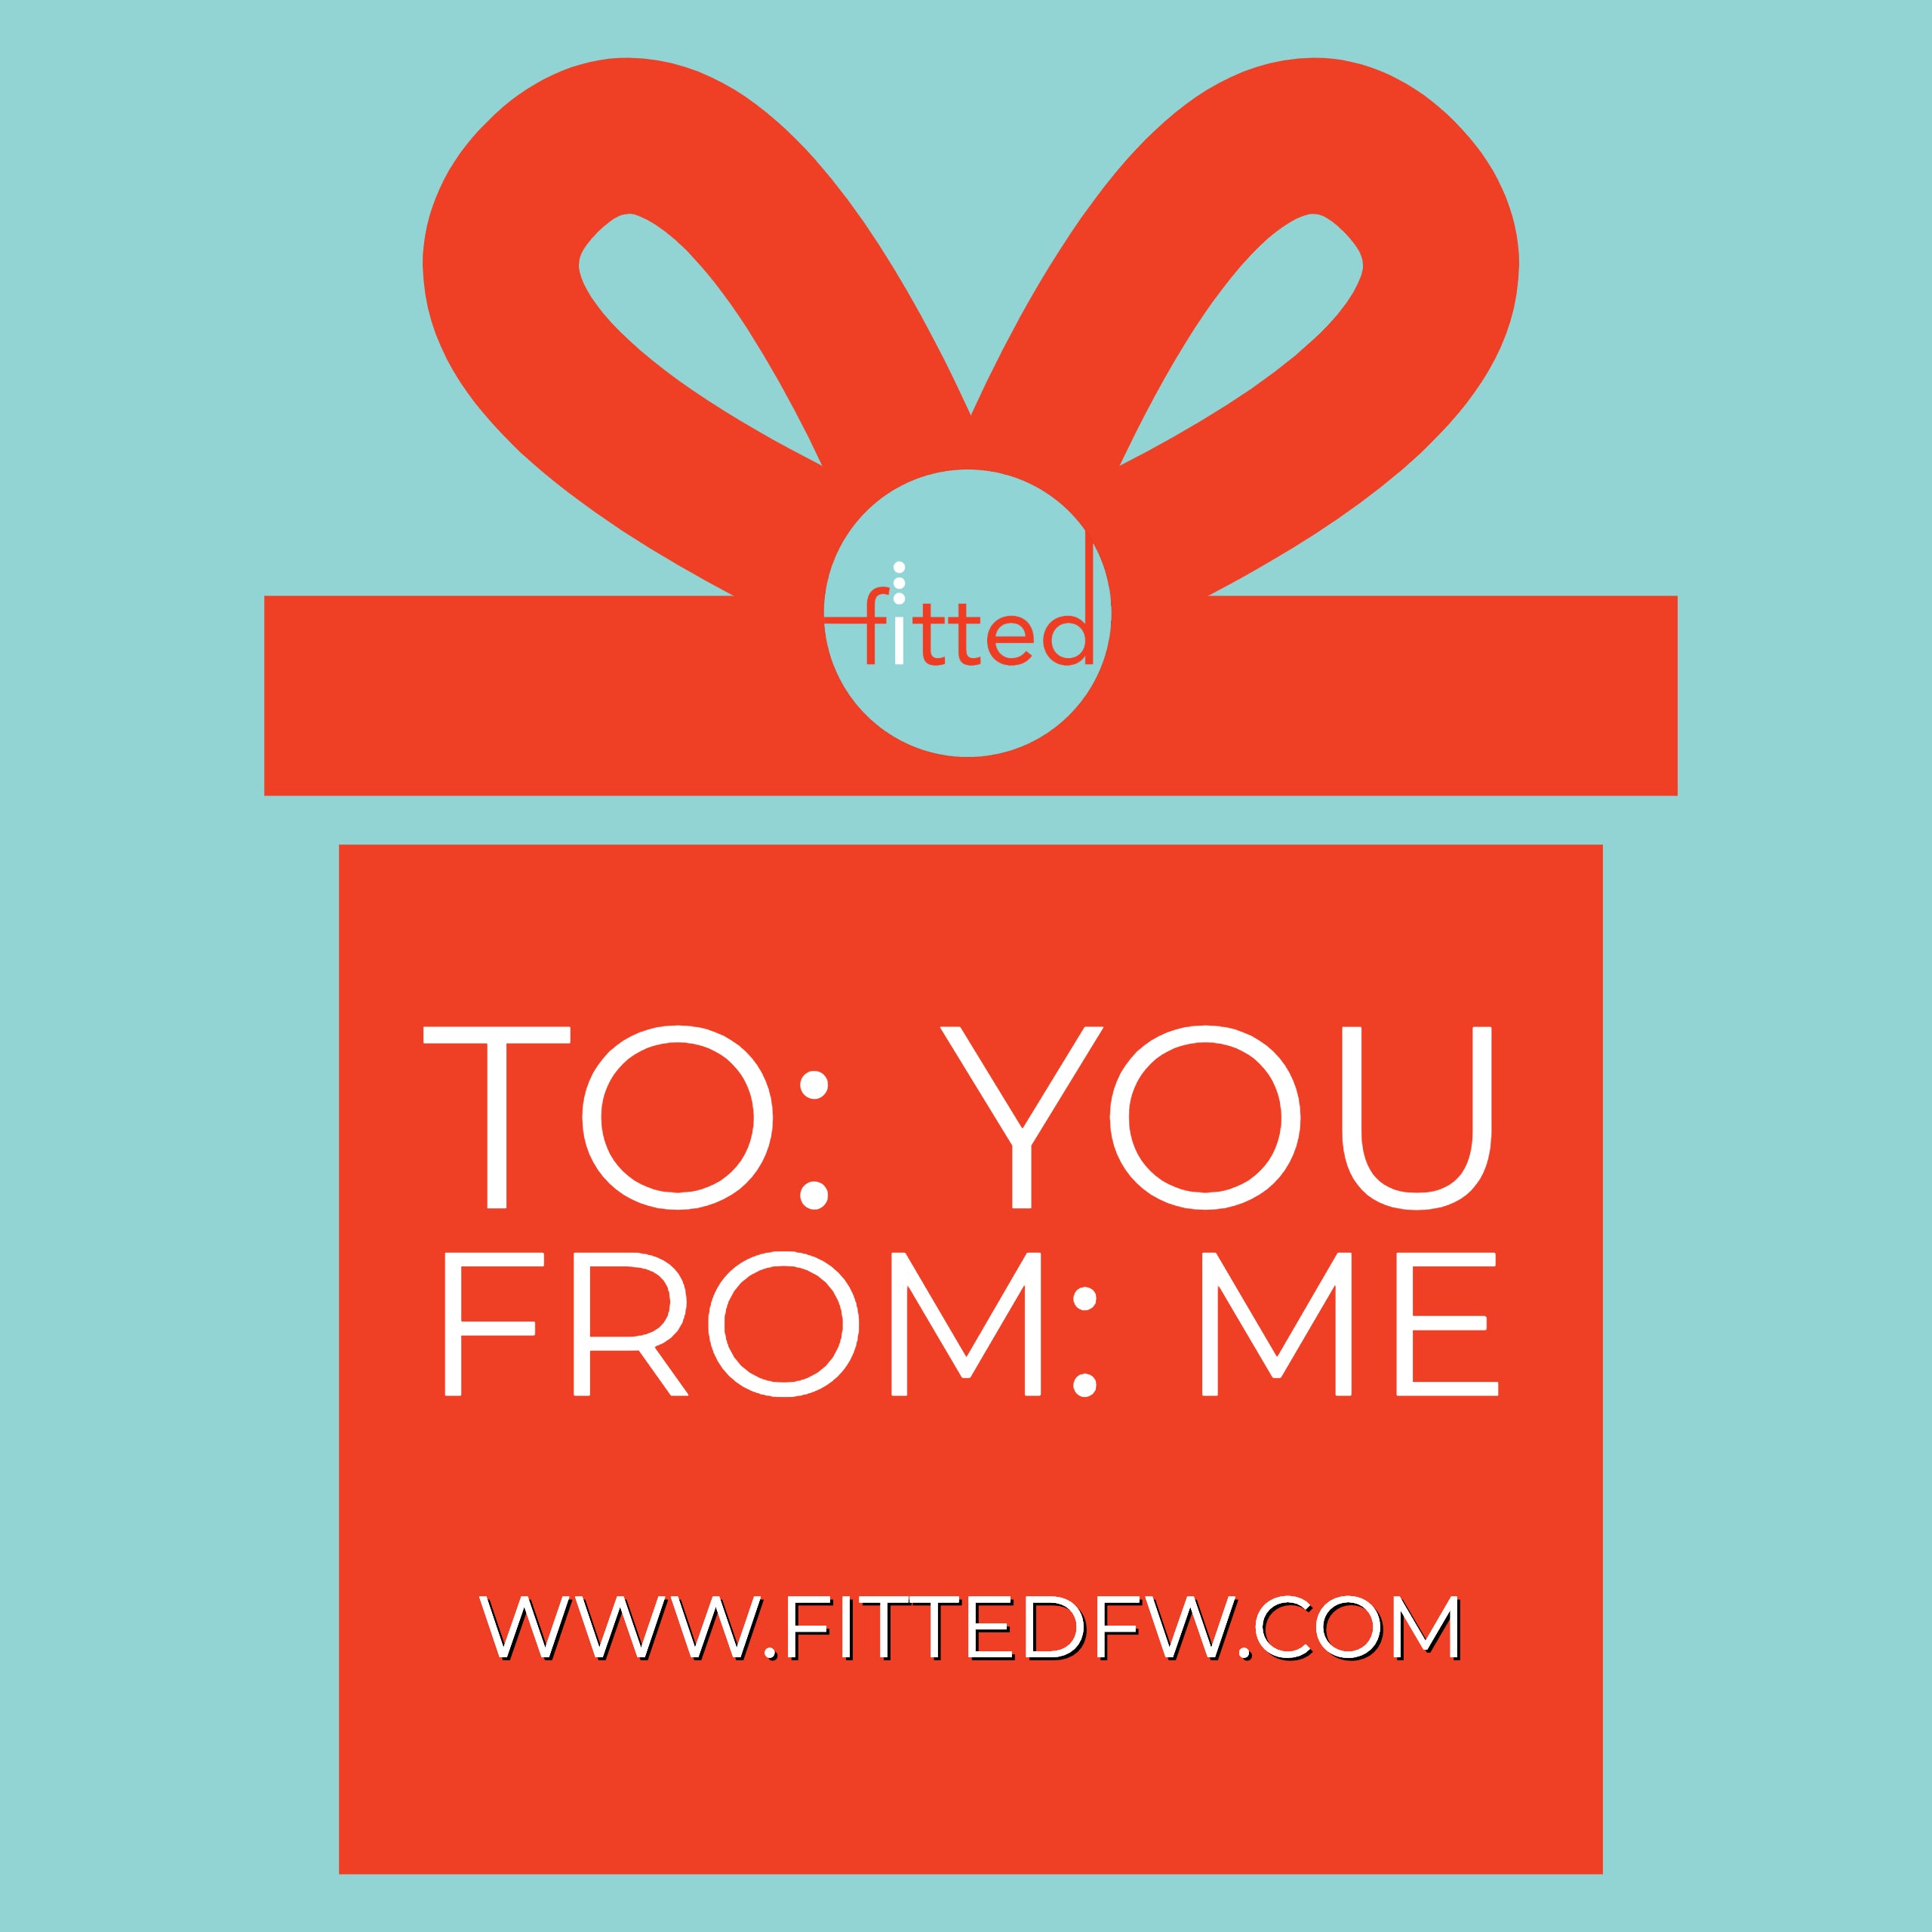 Fitted offers gift cards in any denomination.  Contact fittedfw@gmail.com to purchase.